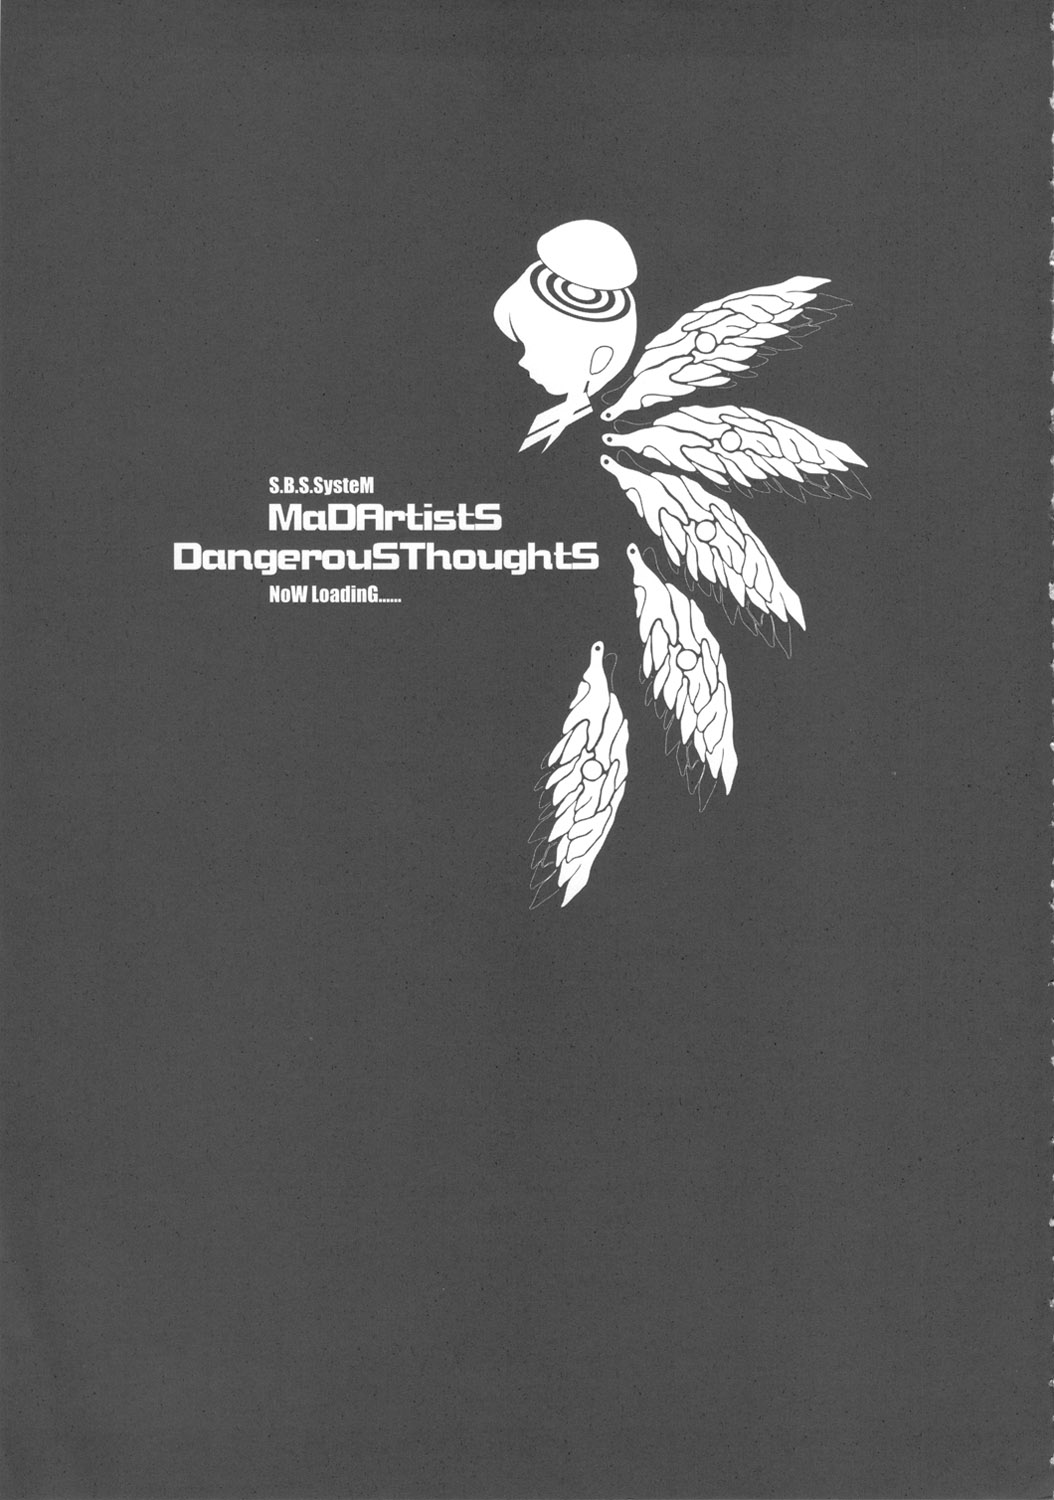 (C60) [DangerouS ThoughtS (よろず)] MaD ArtistS FuturE